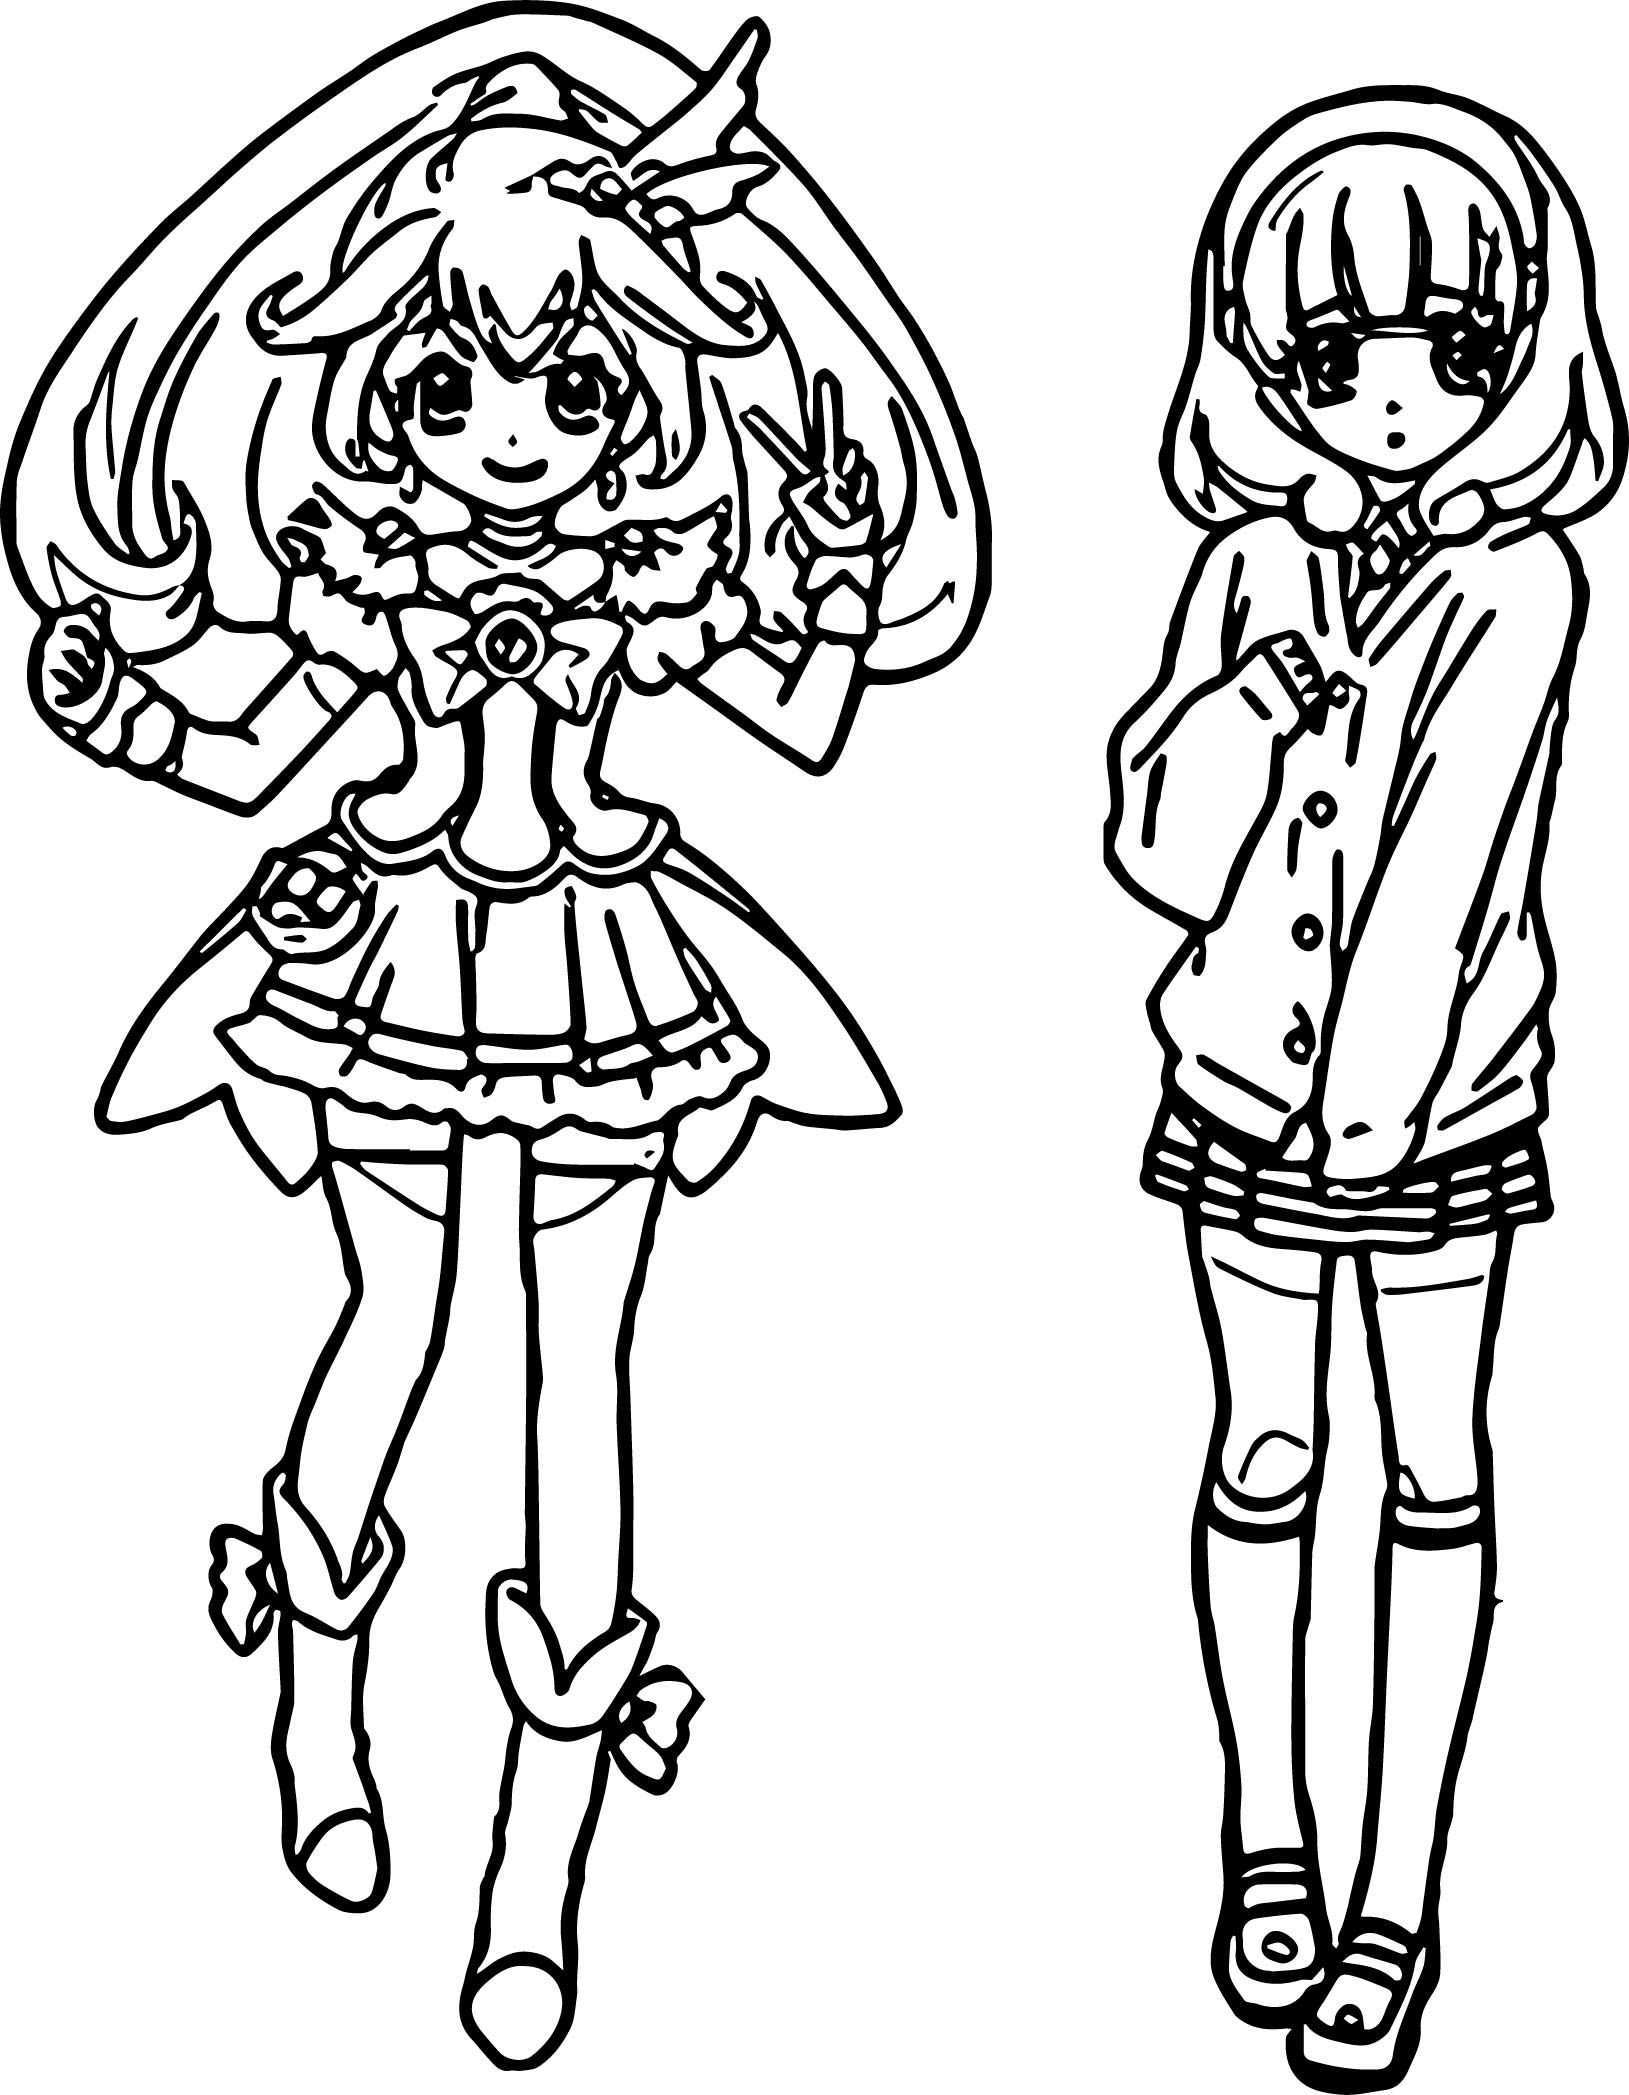 Nice Glitter Force Two Girl Coloring Page Coloring Pages For Girls Glitter Force Colo